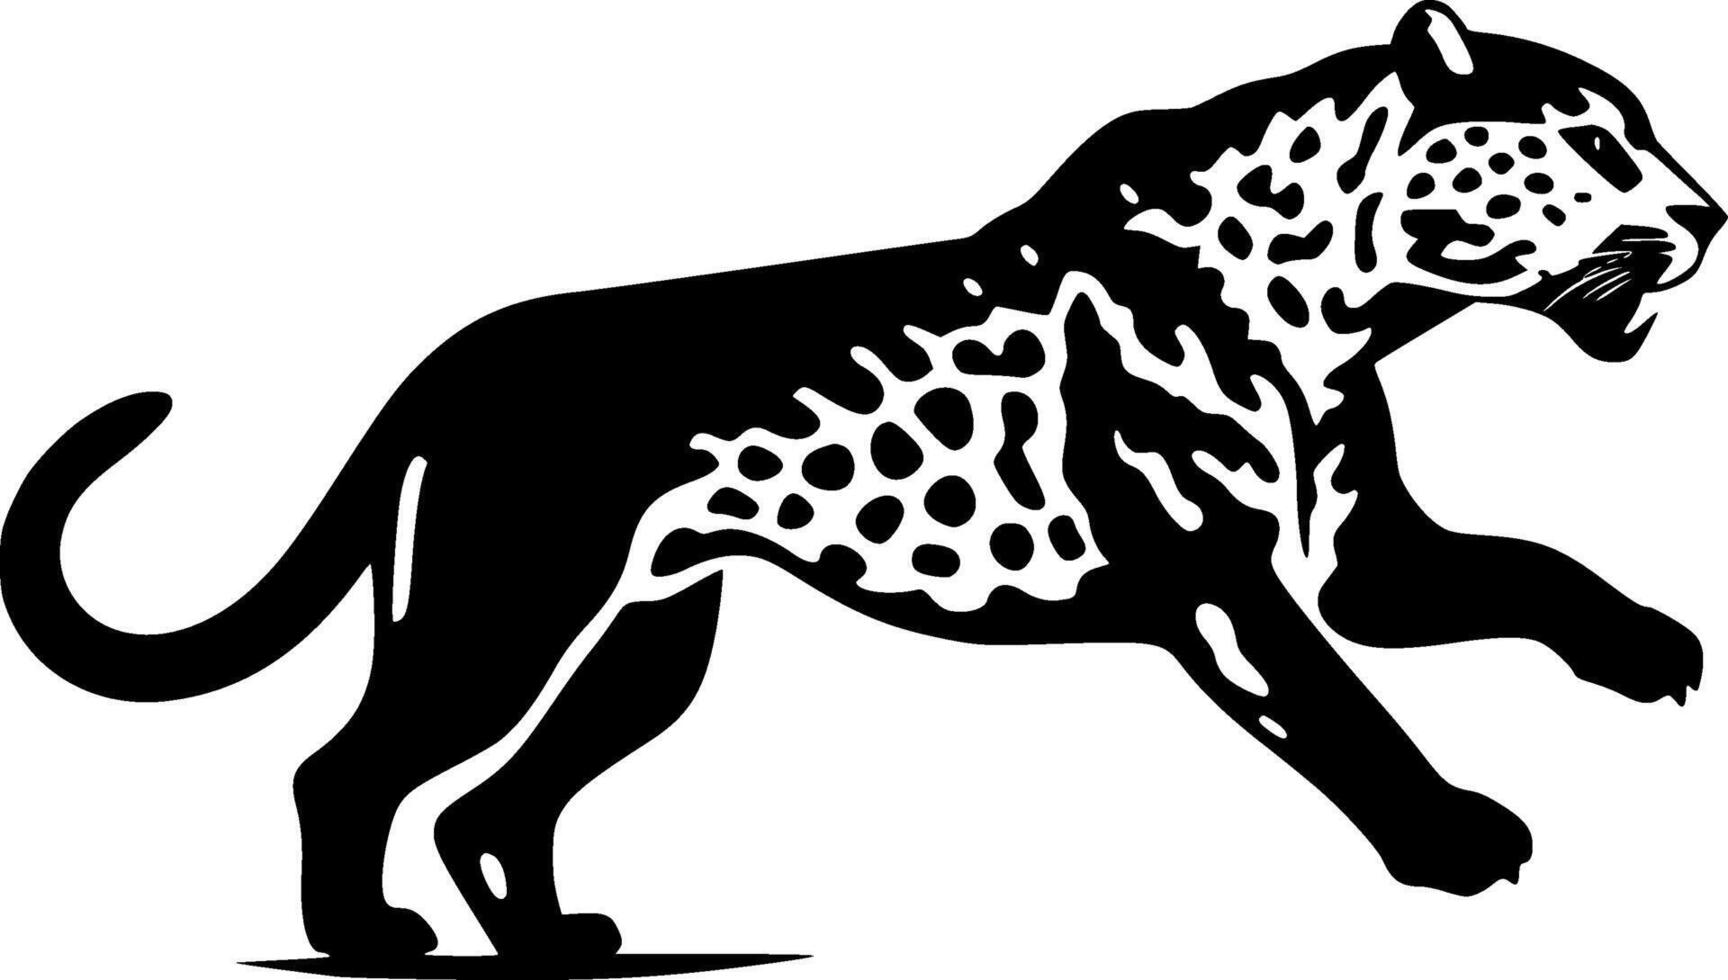 Cheetah - Black and White Isolated Icon - Vector illustration